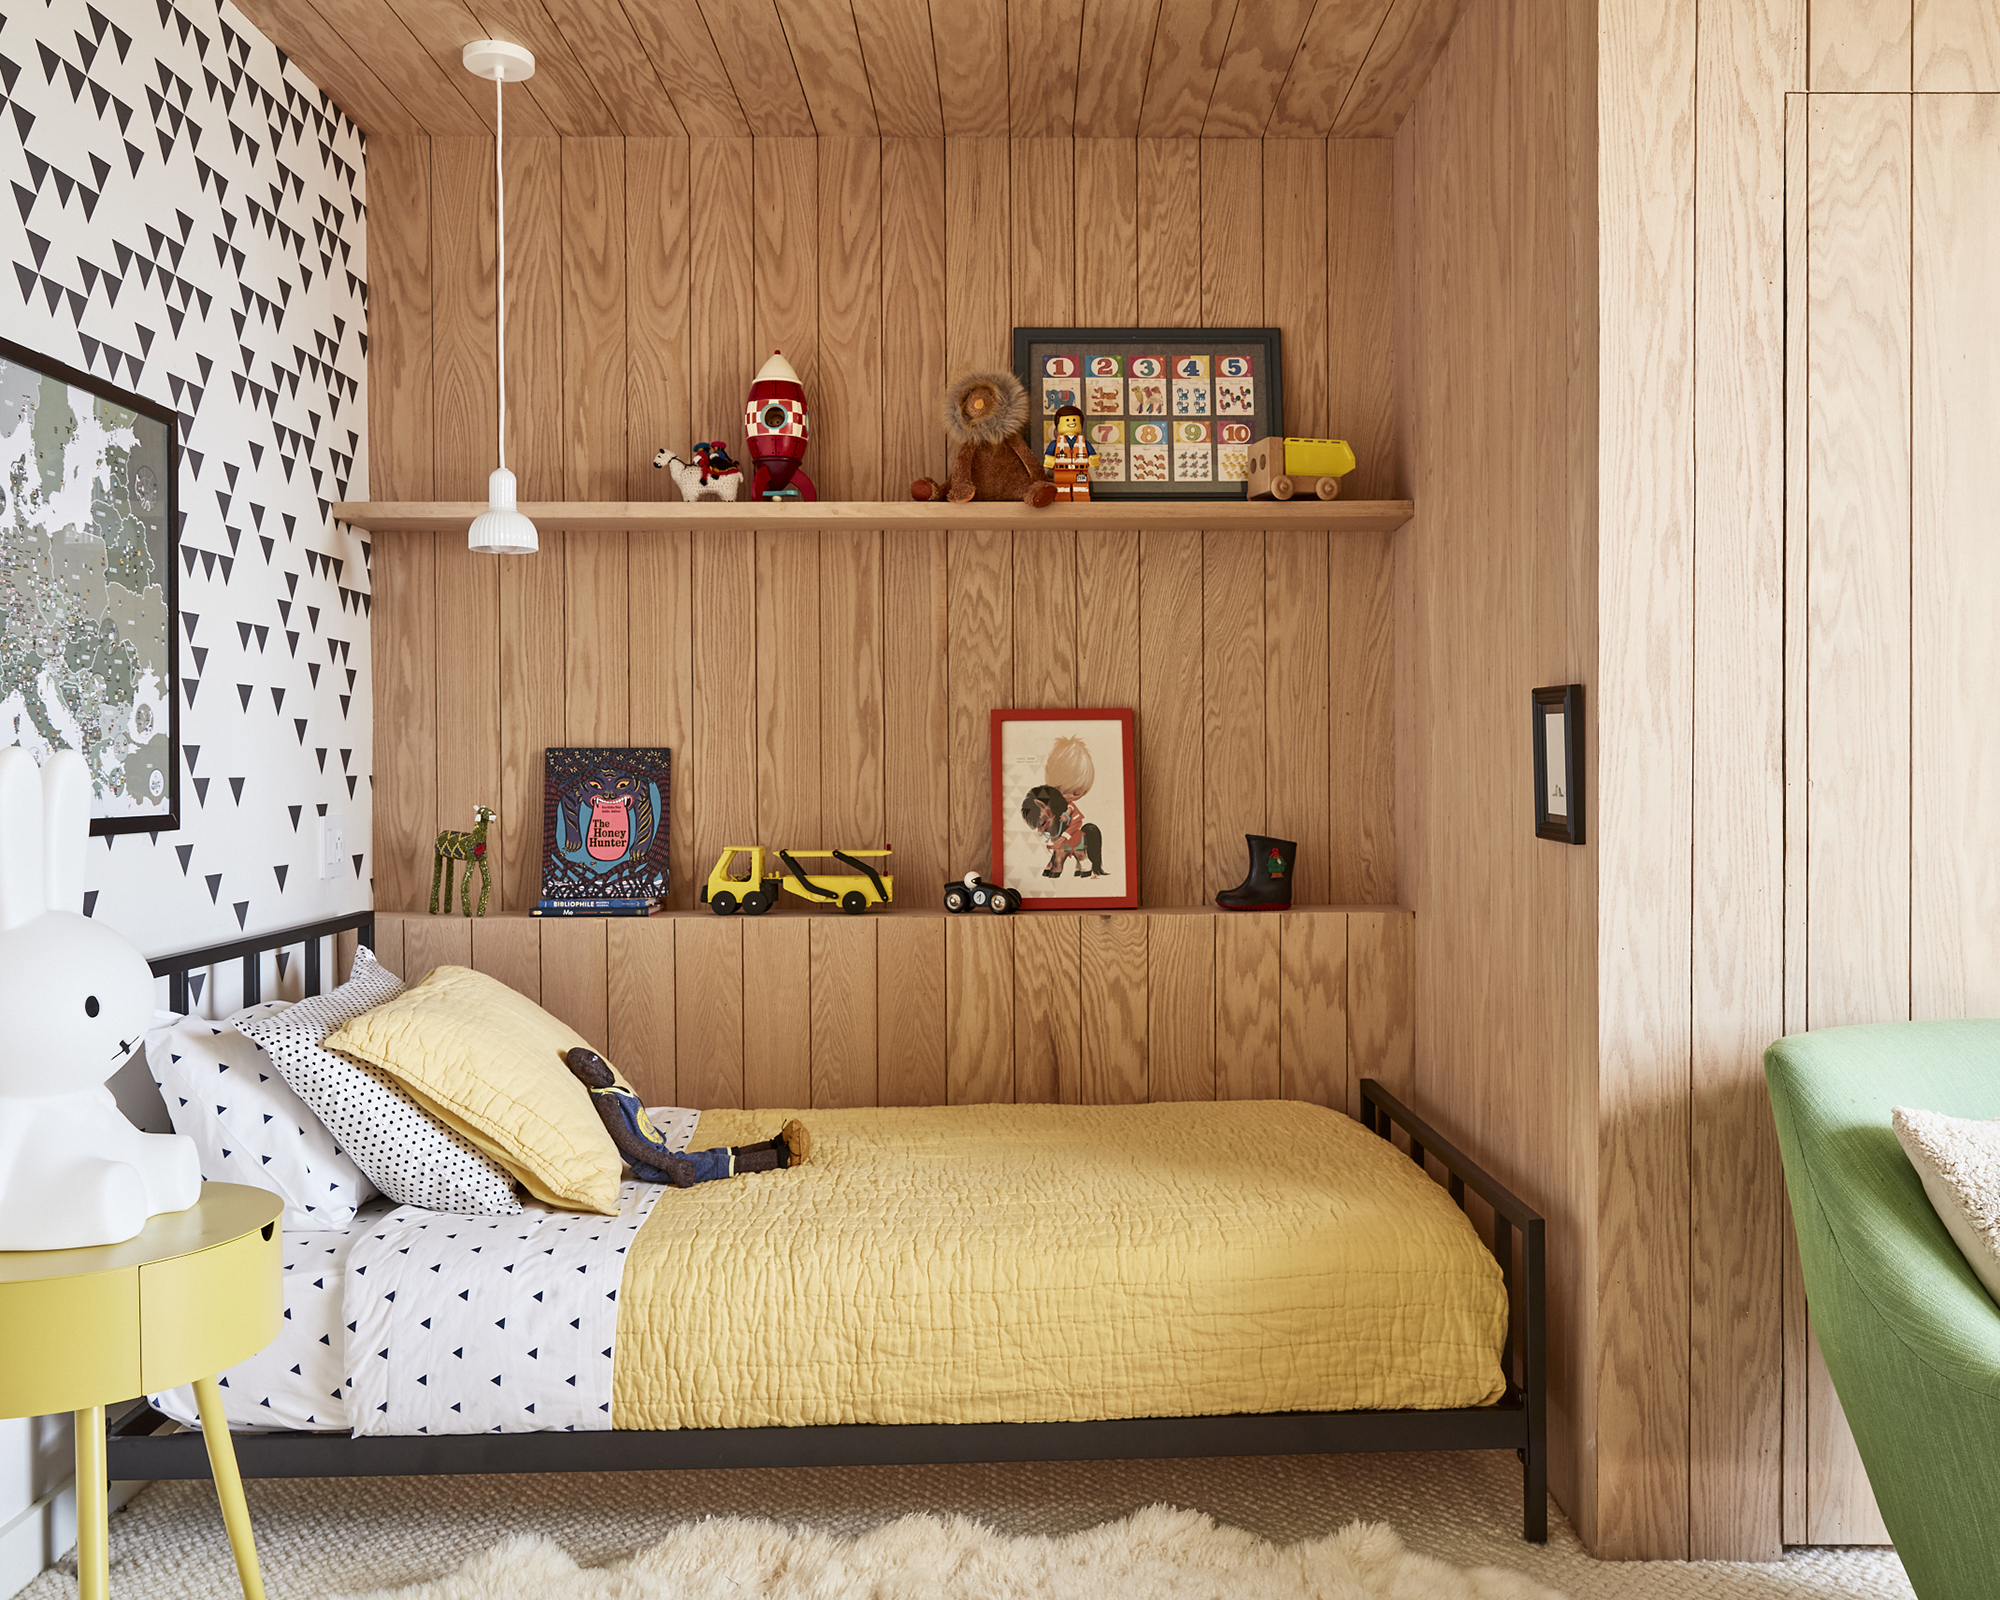 70 Cool Kids Room Ideas Paint Furniture Storage and More